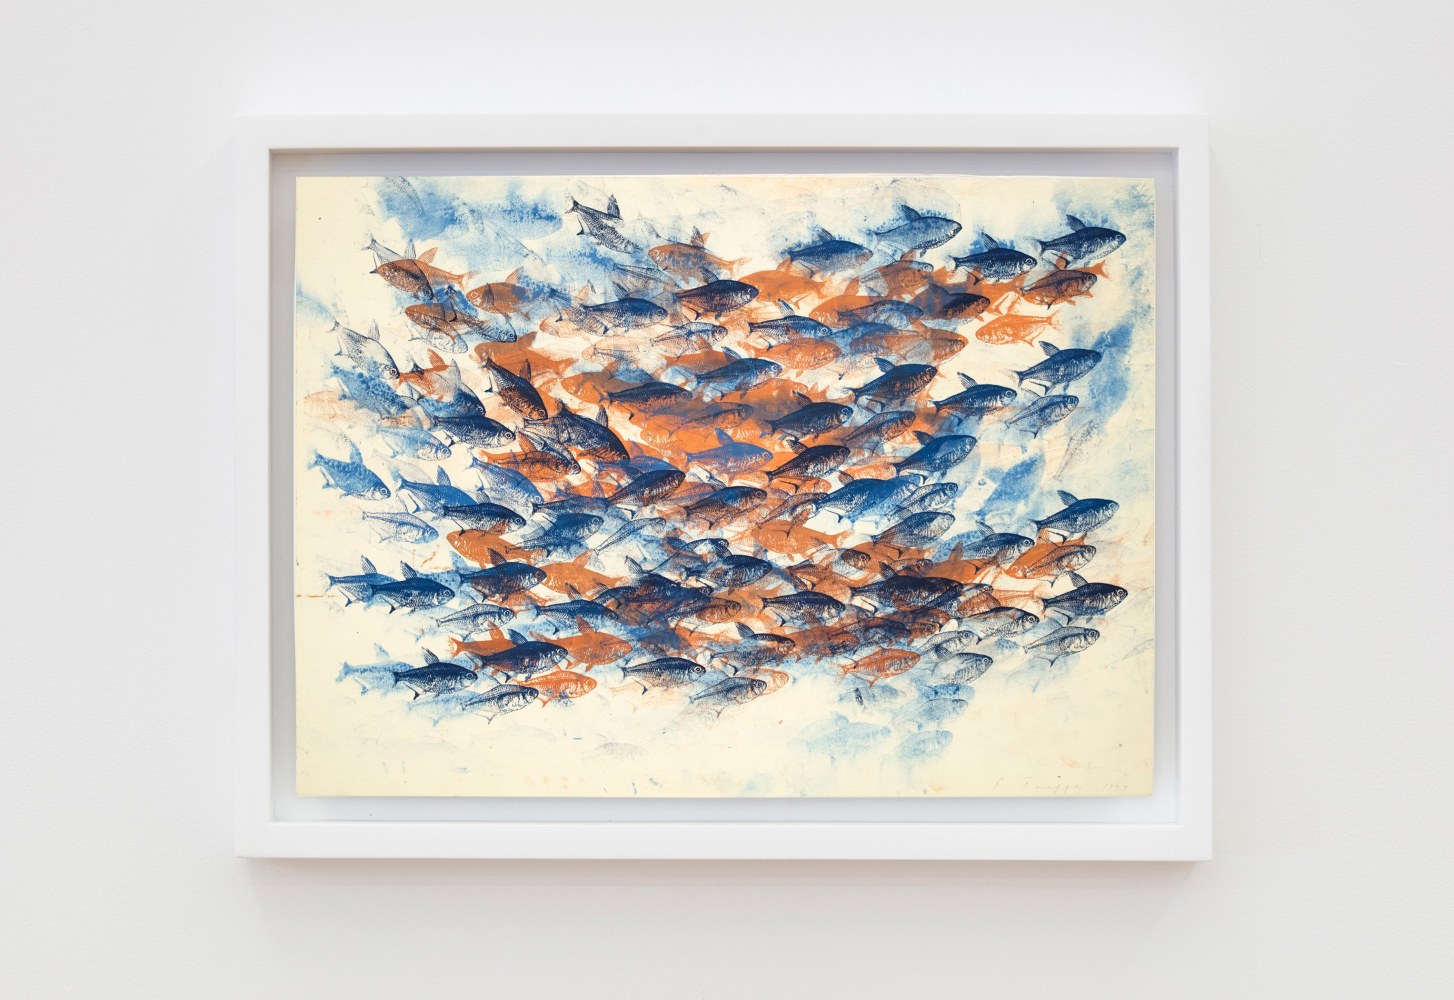 
Philip Taaffe

Untitled (School of Fish), 1997

Oil pigment on paper

19 3/4 x 27 1/2 inches (50.2 x 69.9 cm)